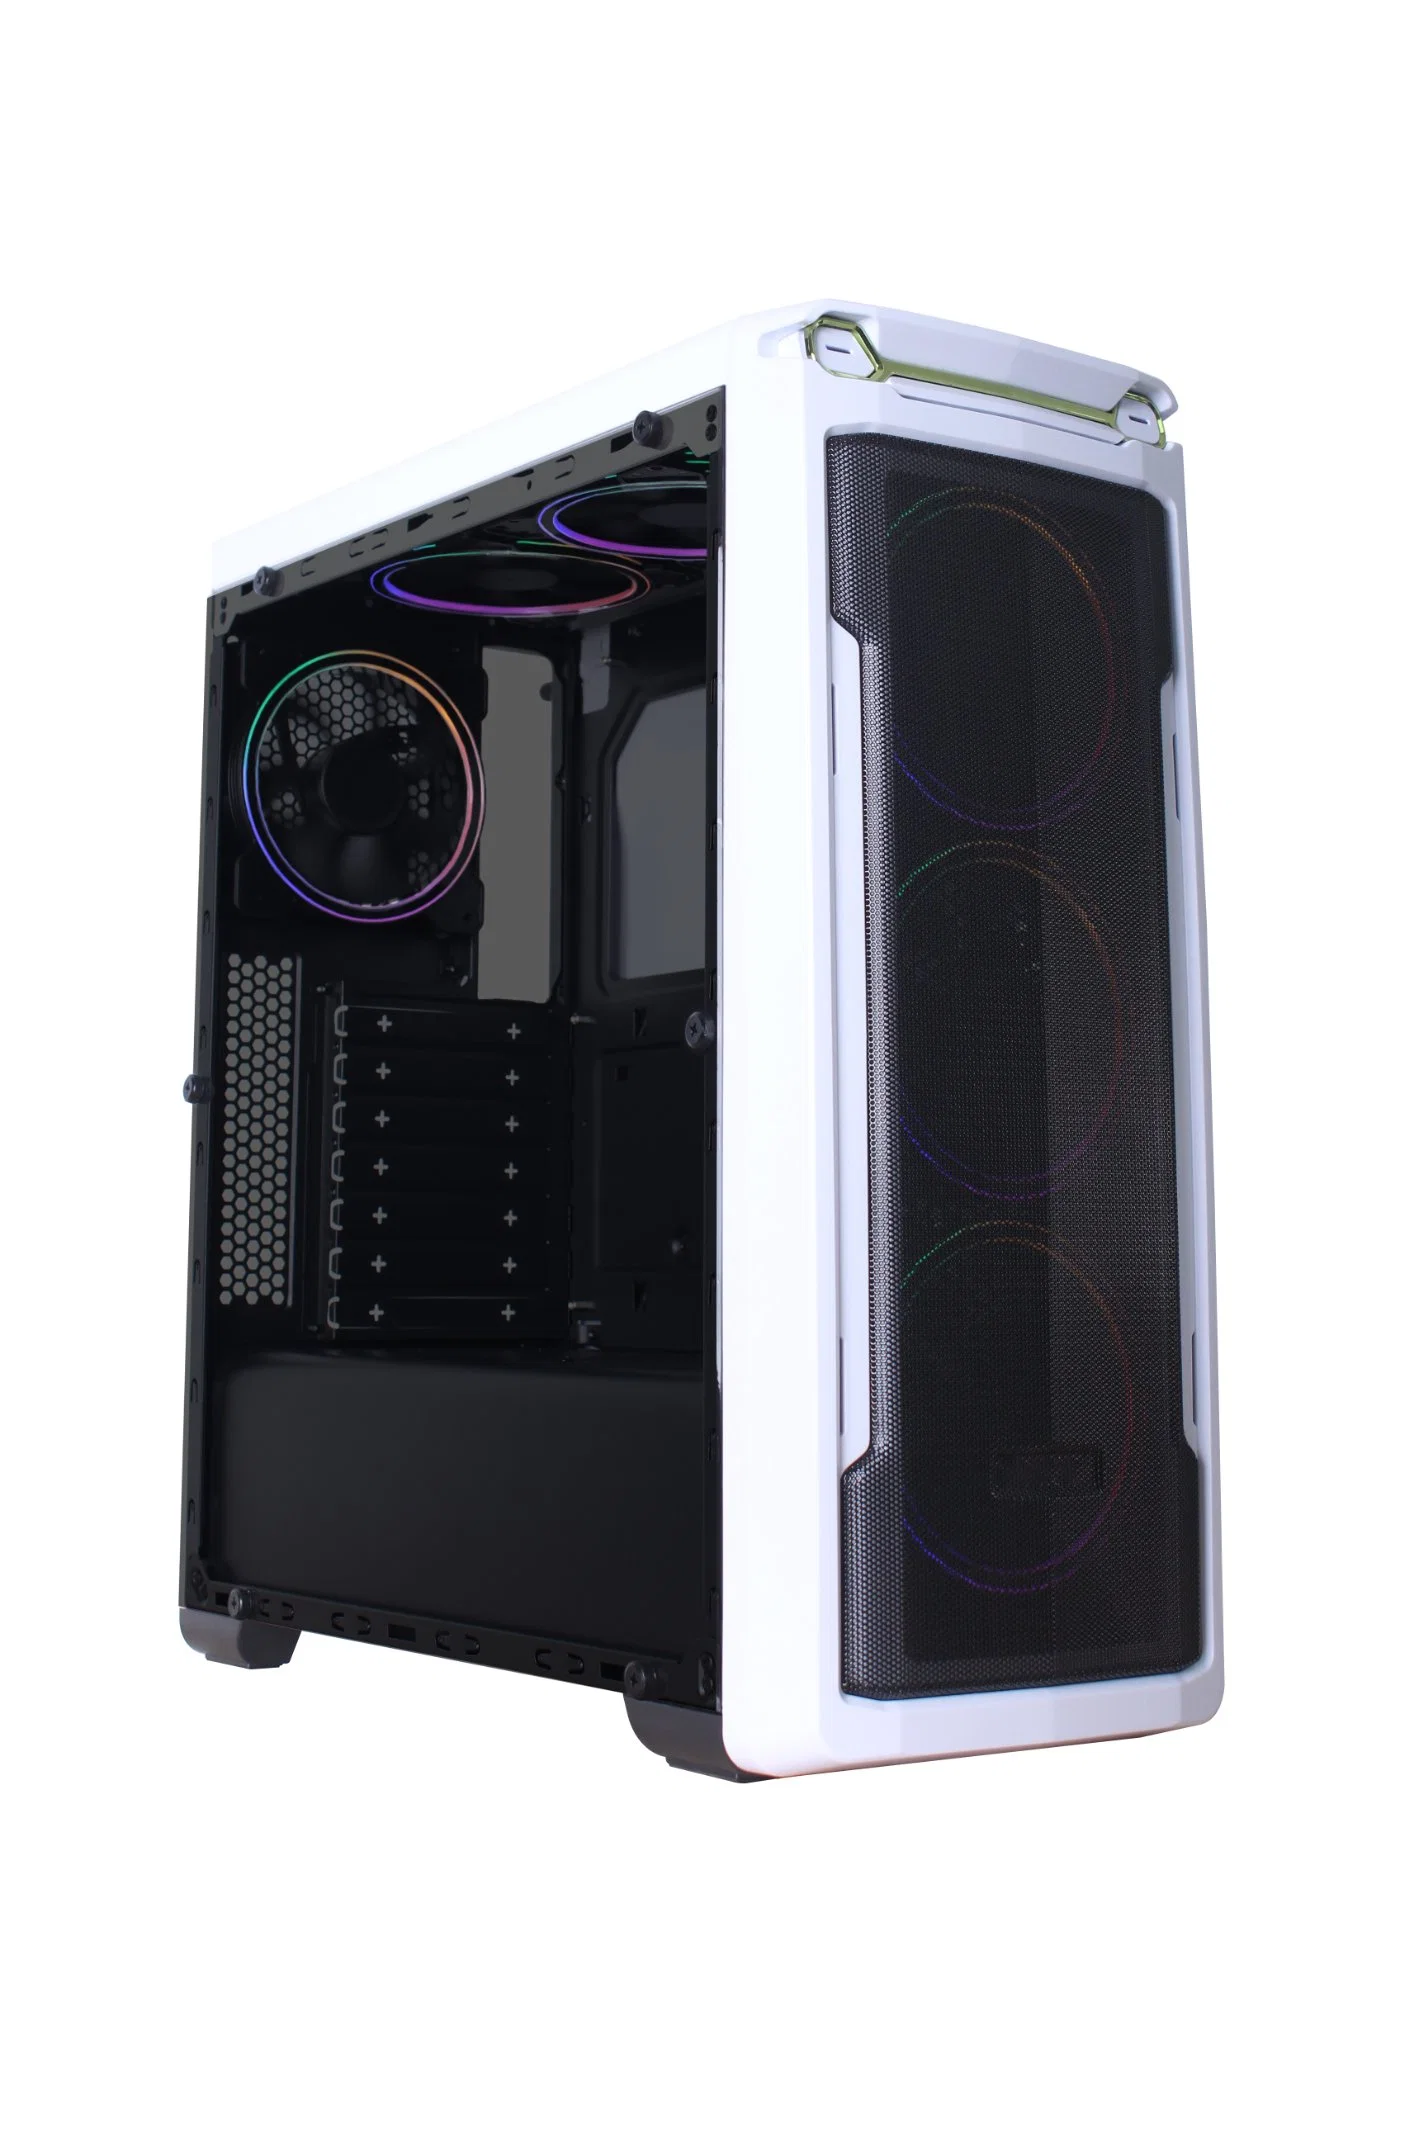 Acrylic Computer Case PC Case Gaming with RGB Fans